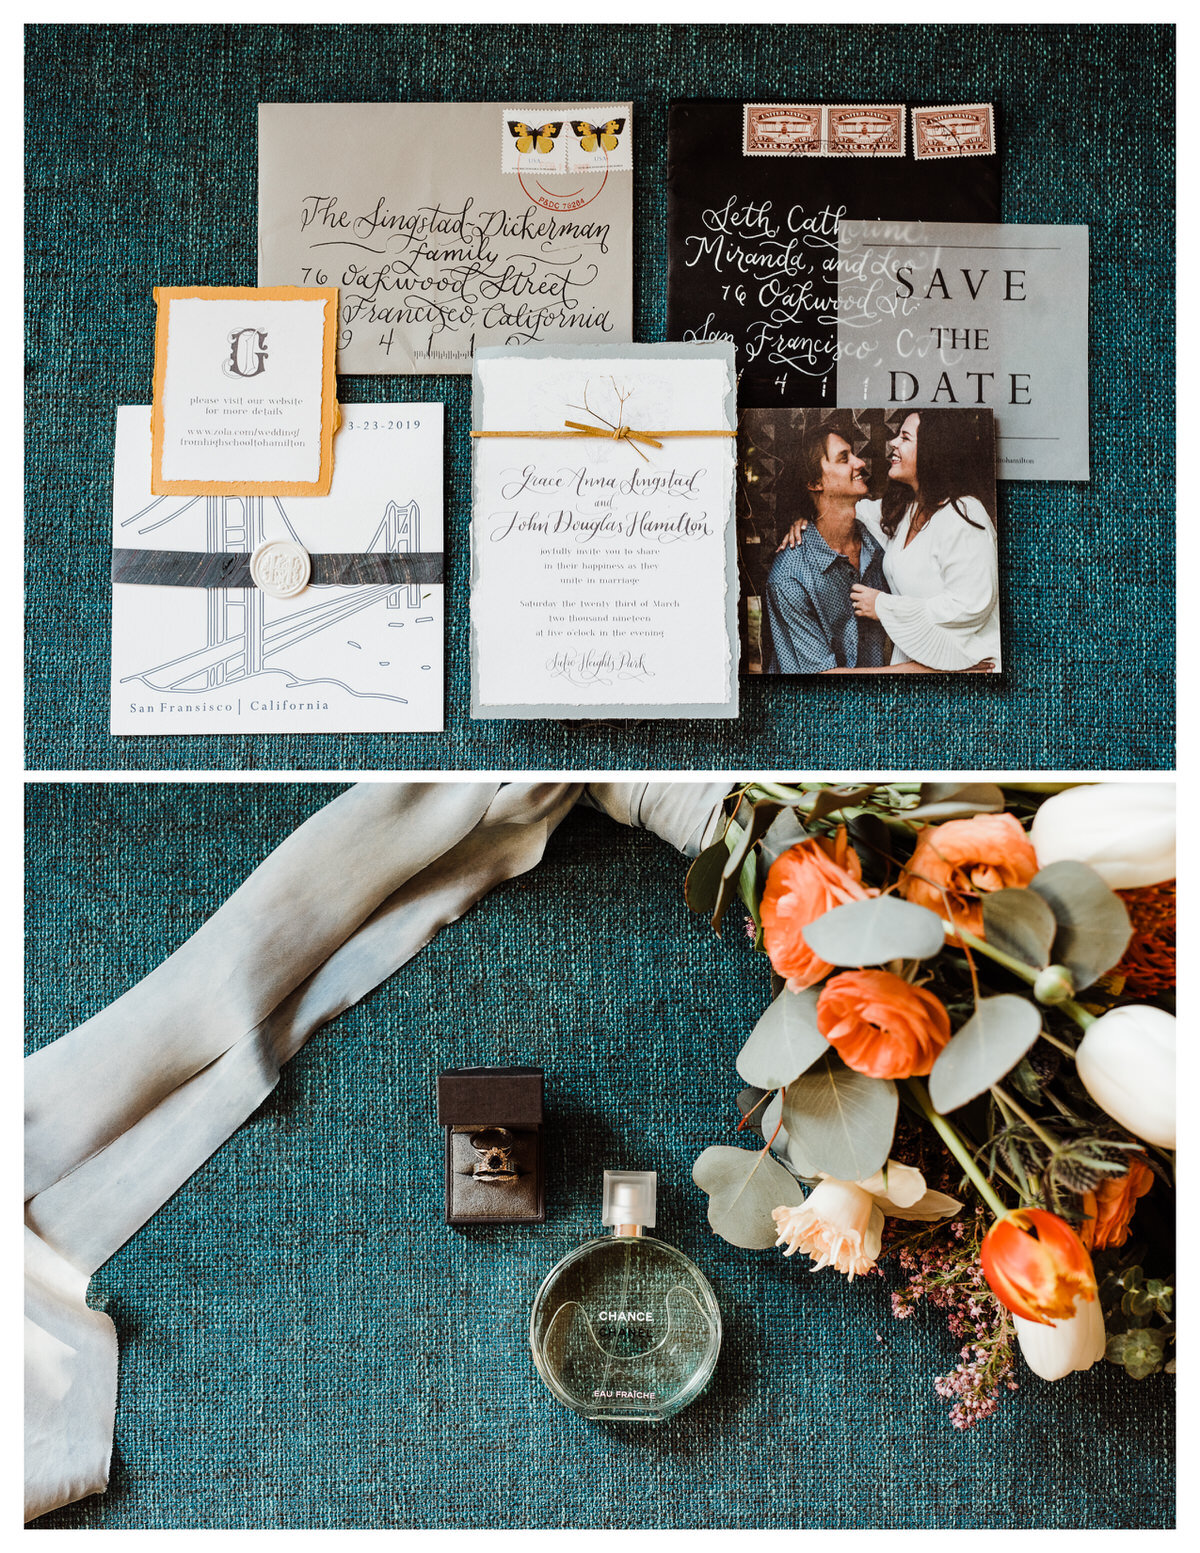 Sutro-Baths-San-Francisco-Elopement-Custom-Calligraphy-Invitation-Suite-Blue-Theme-with-Rings-and-Perfume.jpg